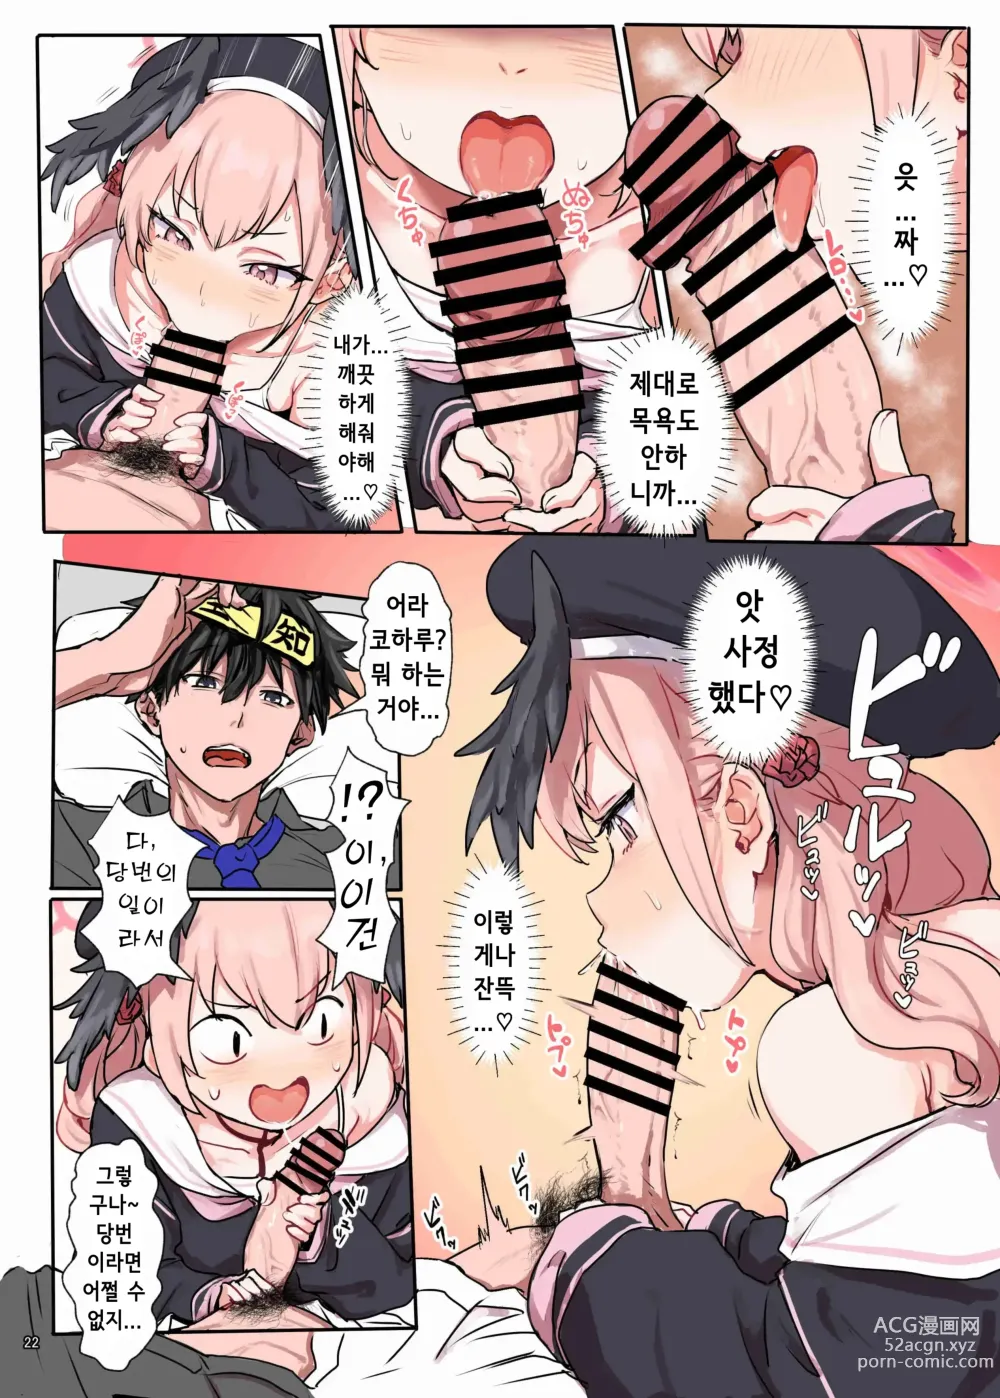 Page 24 of doujinshi 블루아카 꽁냥러브 에로 합동지 